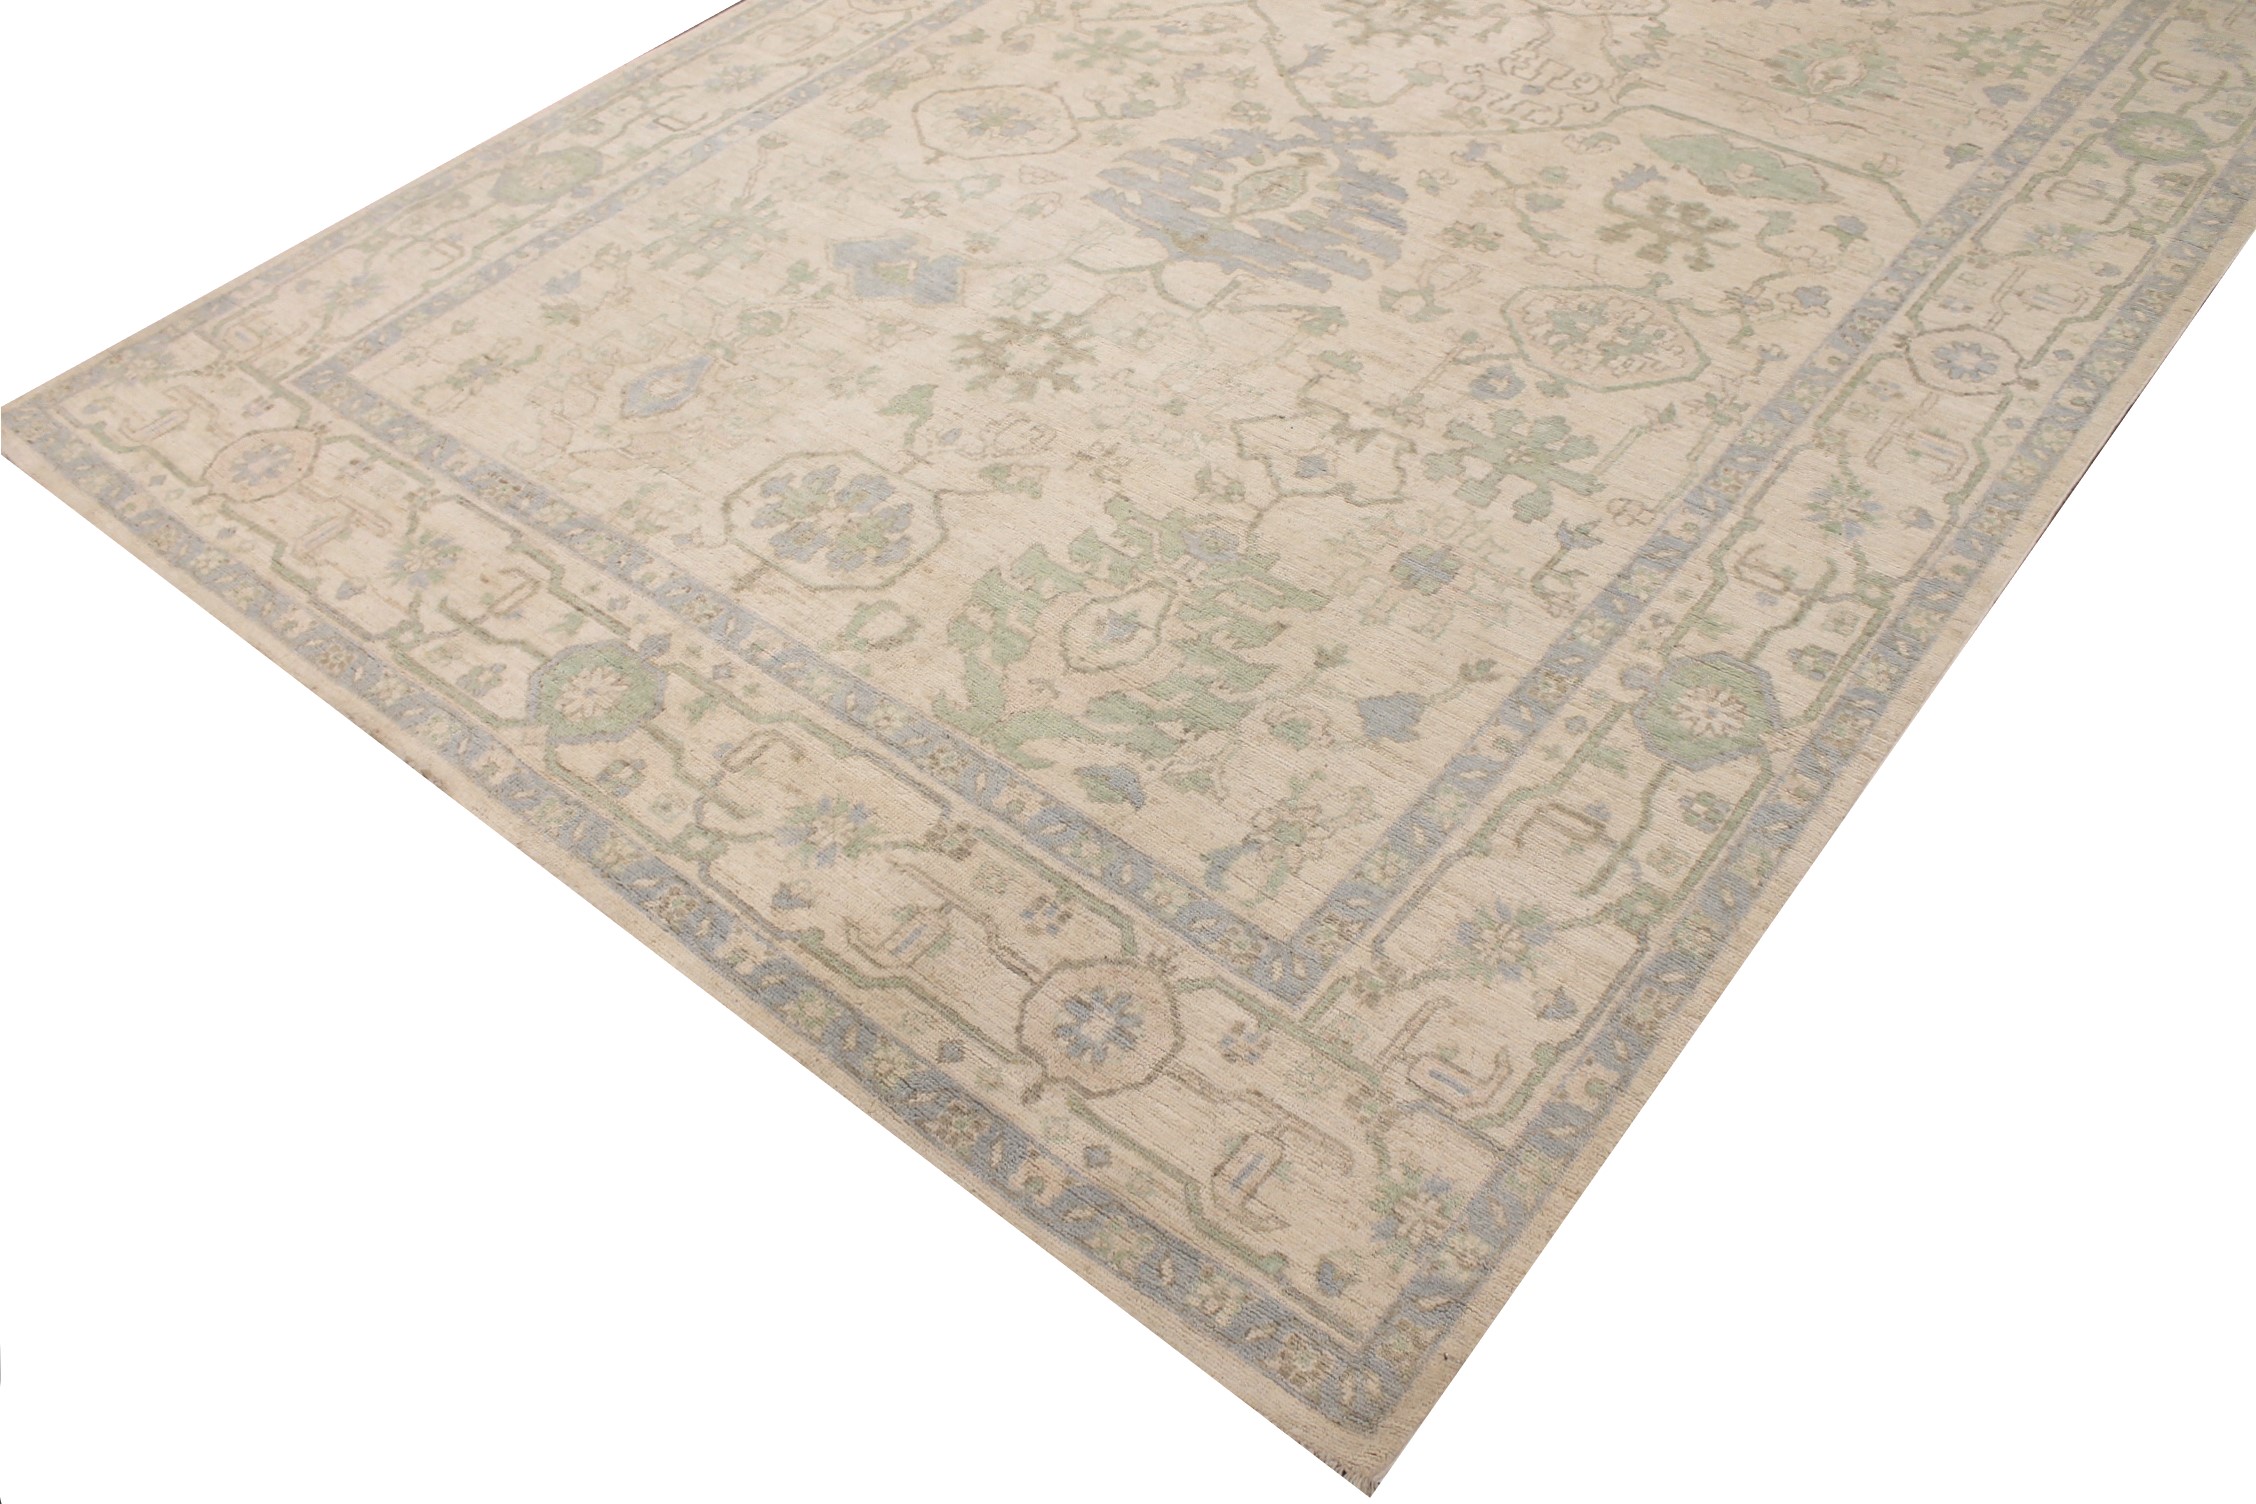 9x12 Oushak Hand Knotted Wool Area Rug - MR028087